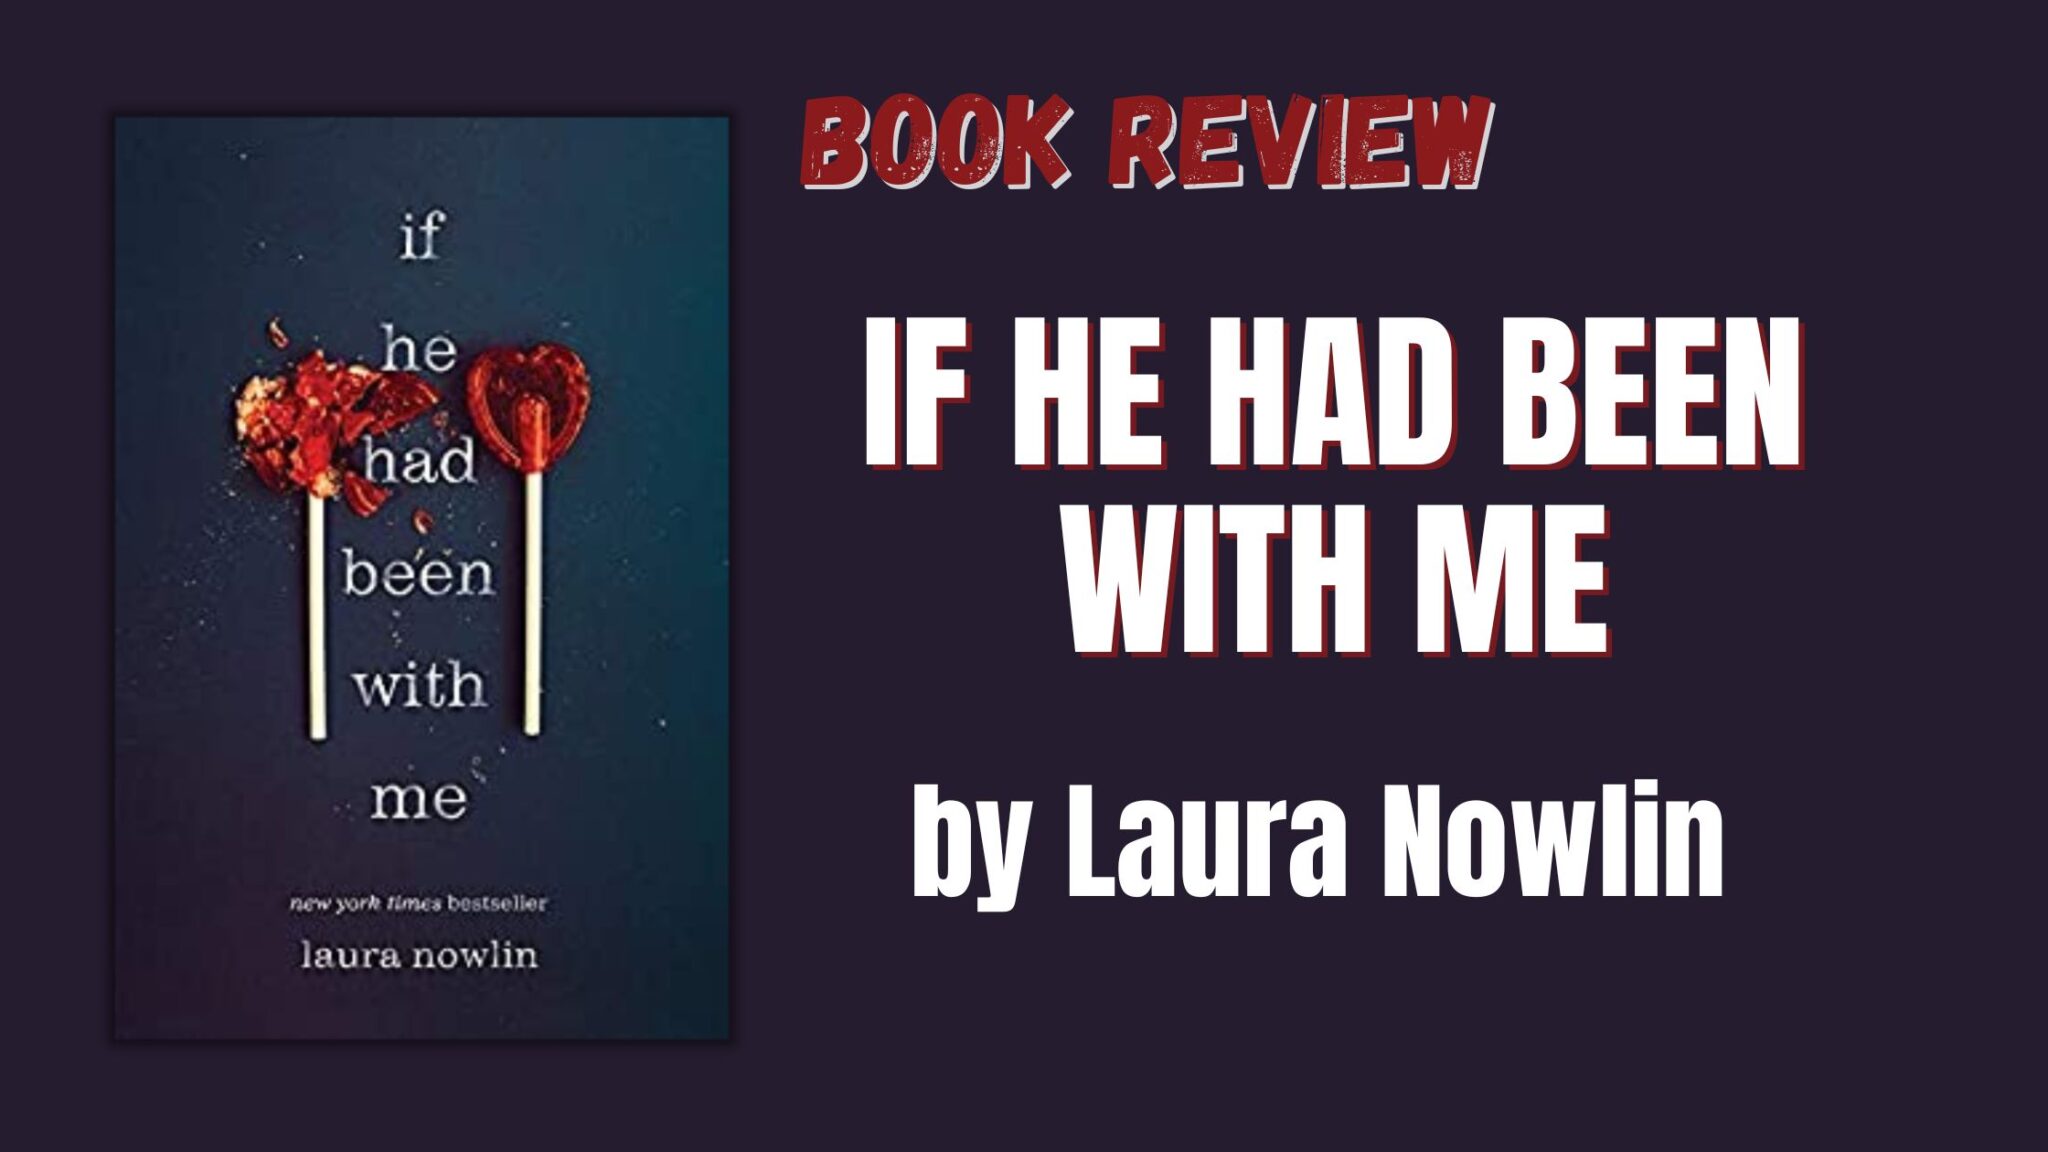 book review if he had been with me